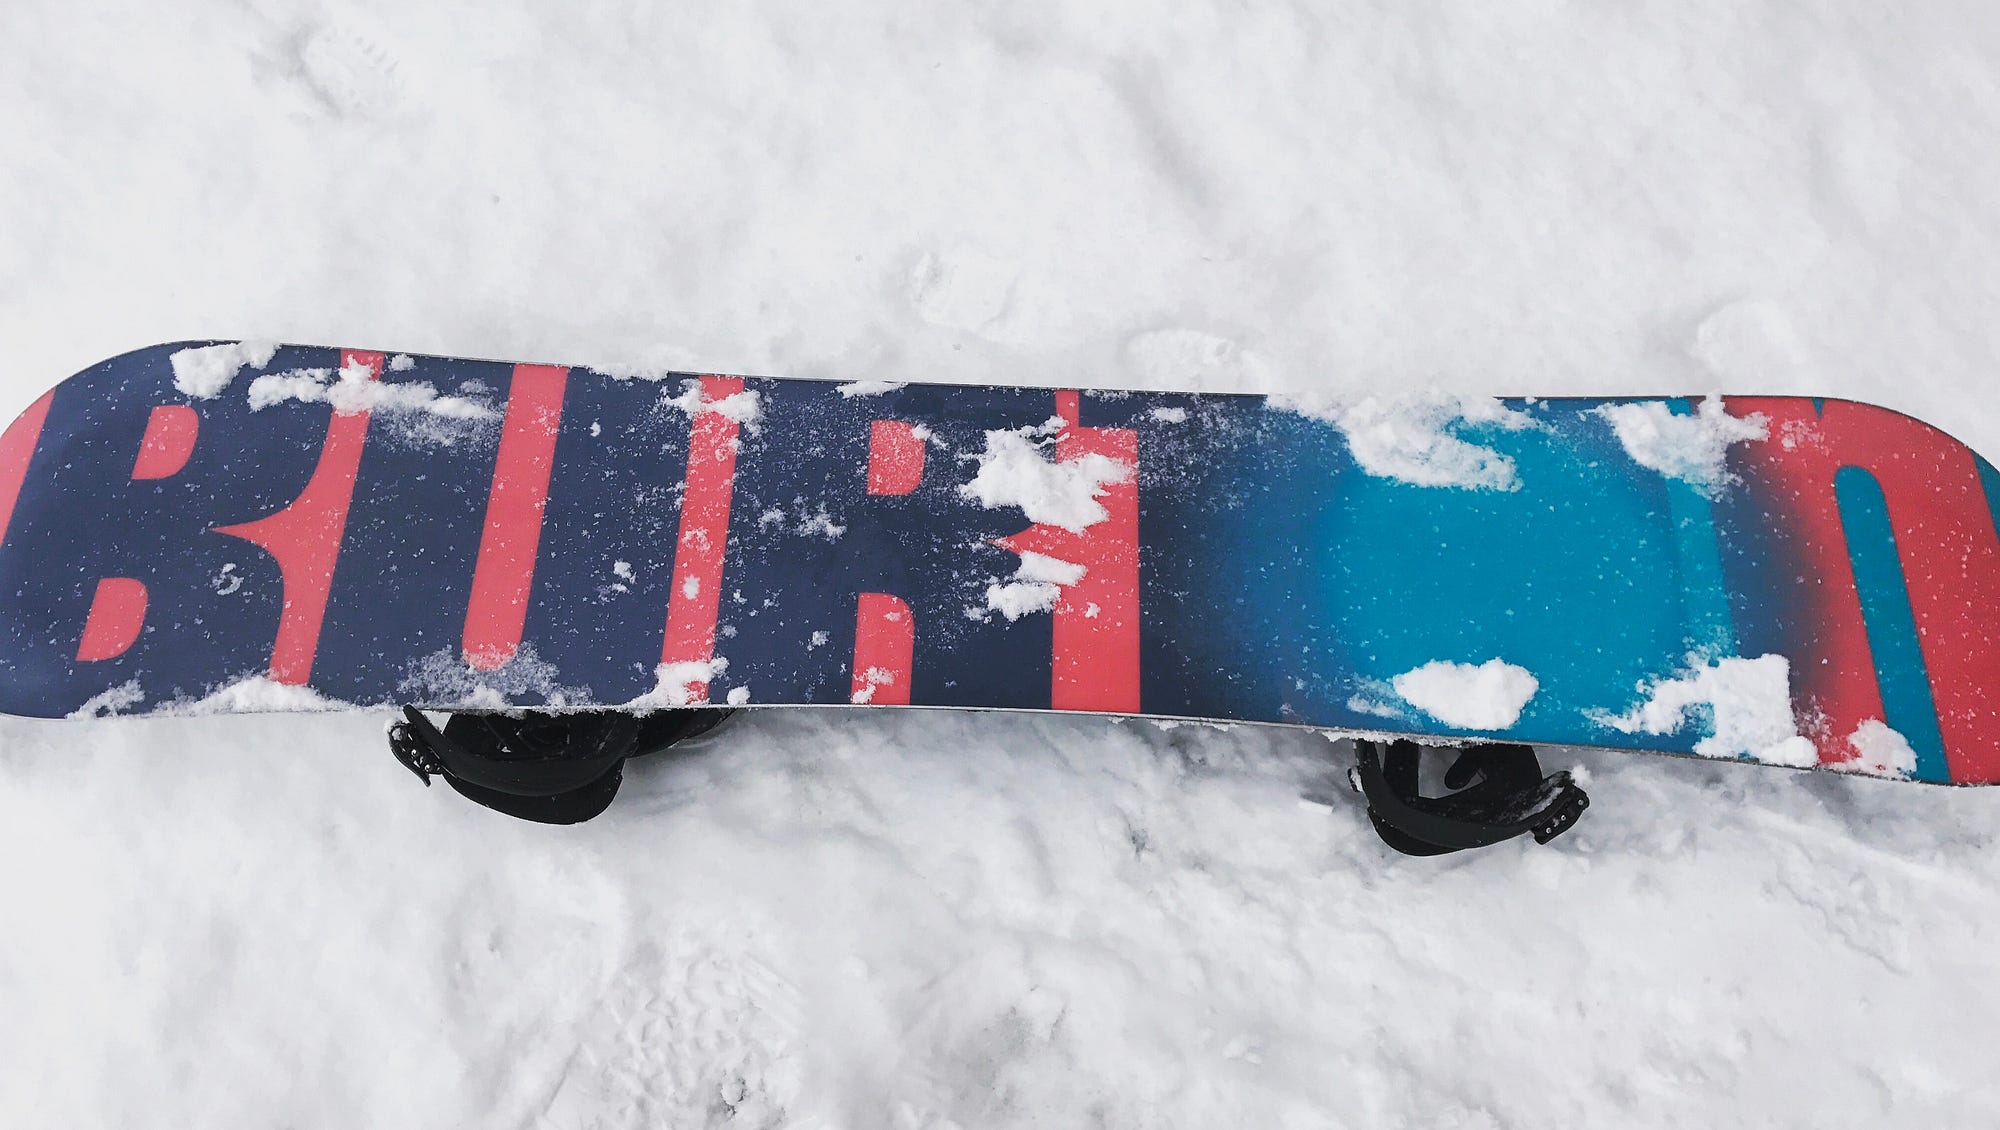 The importance of having a properly waxed snowboard